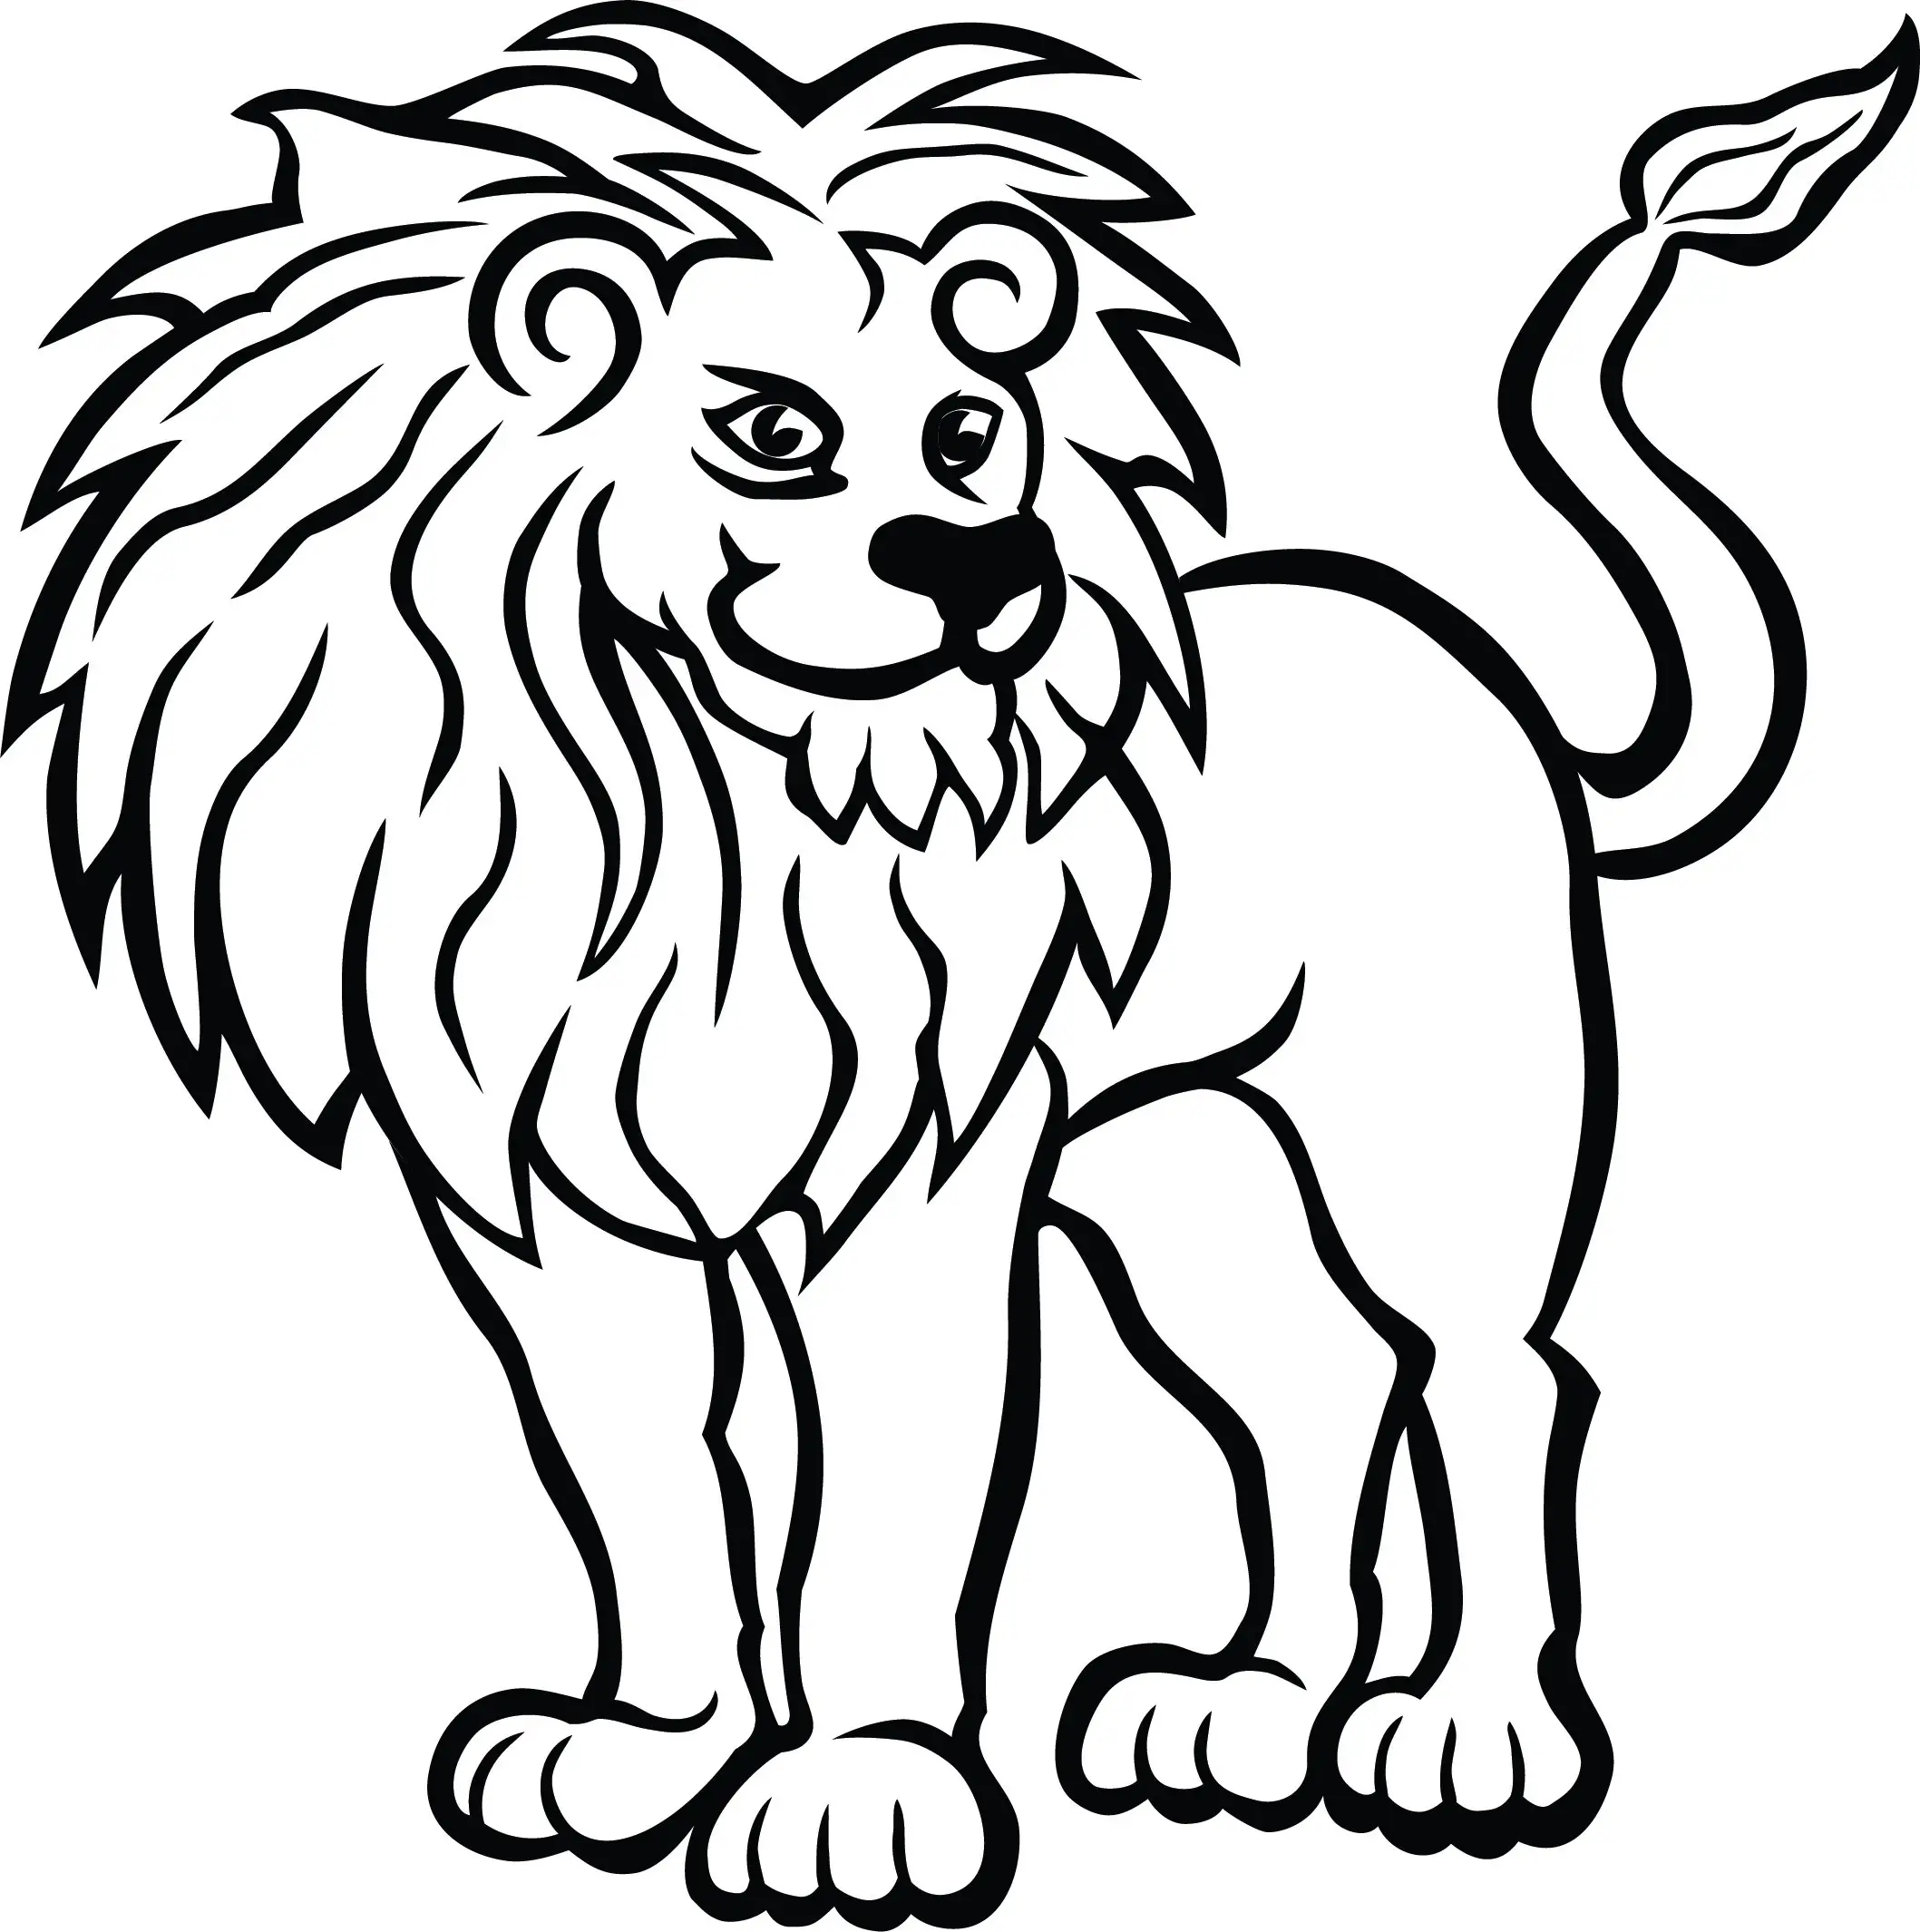 Lions (Free Coloring Pages for Kids) Rainbow Printables